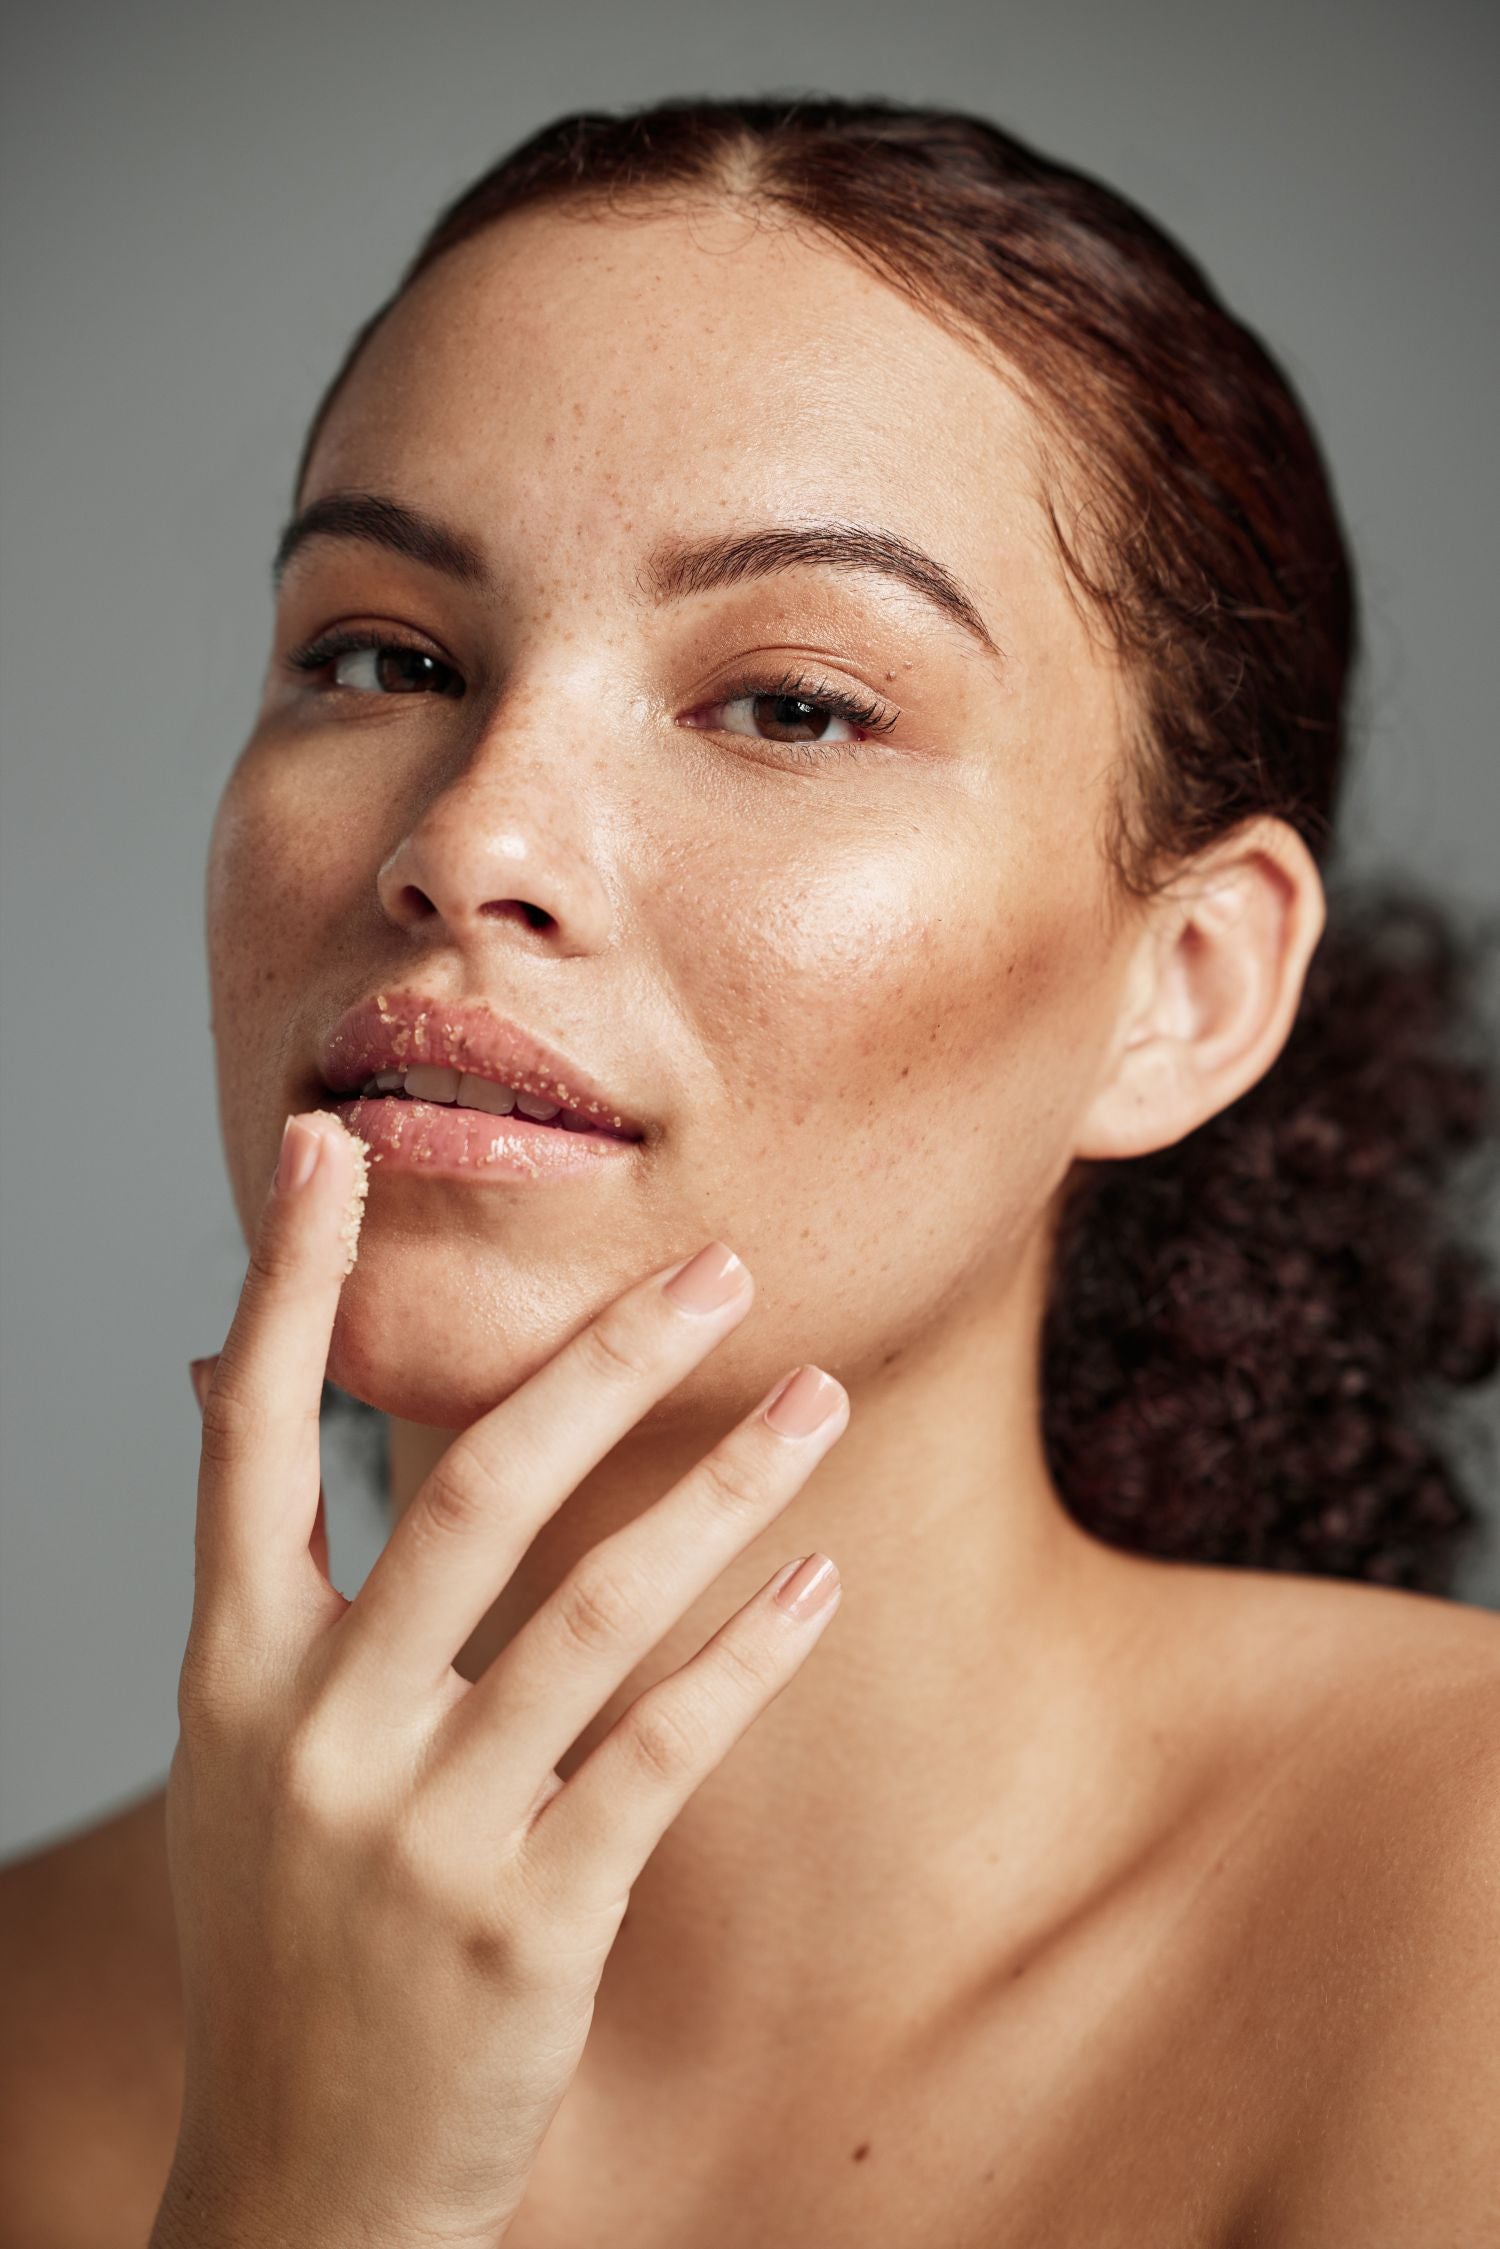 A Fearless Femme Revels In The Application Of Naturally Wicked Cinnamon Lip Scrub To Sculpt Perfection